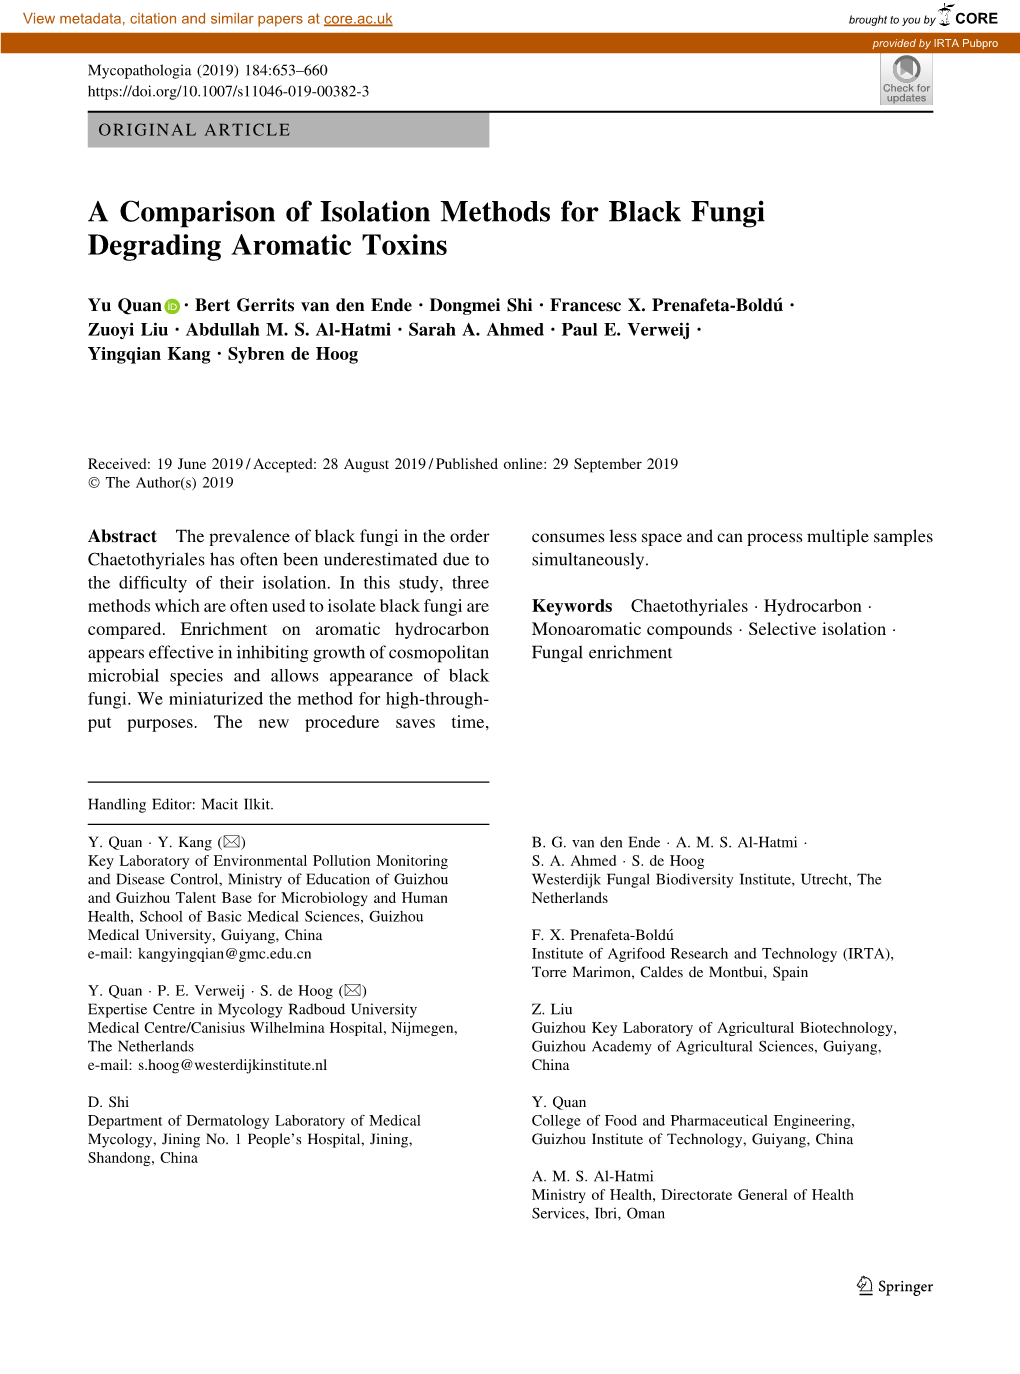 A Comparison of Isolation Methods for Black Fungi Degrading Aromatic Toxins